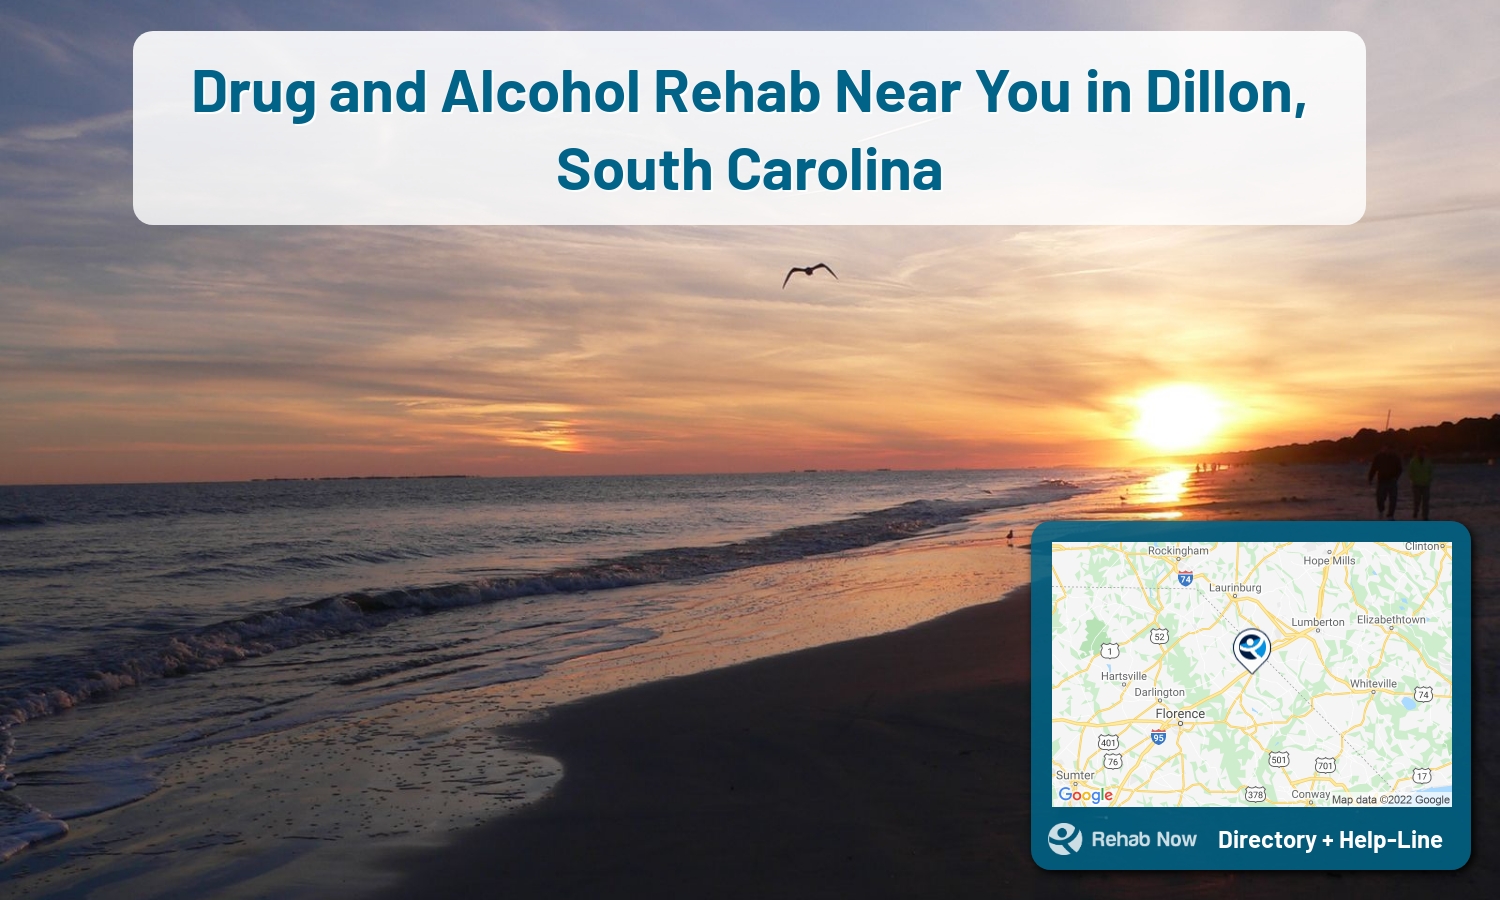 Dillon, SC Treatment Centers. Find drug rehab in Dillon, South Carolina, or detox and treatment programs. Get the right help now!